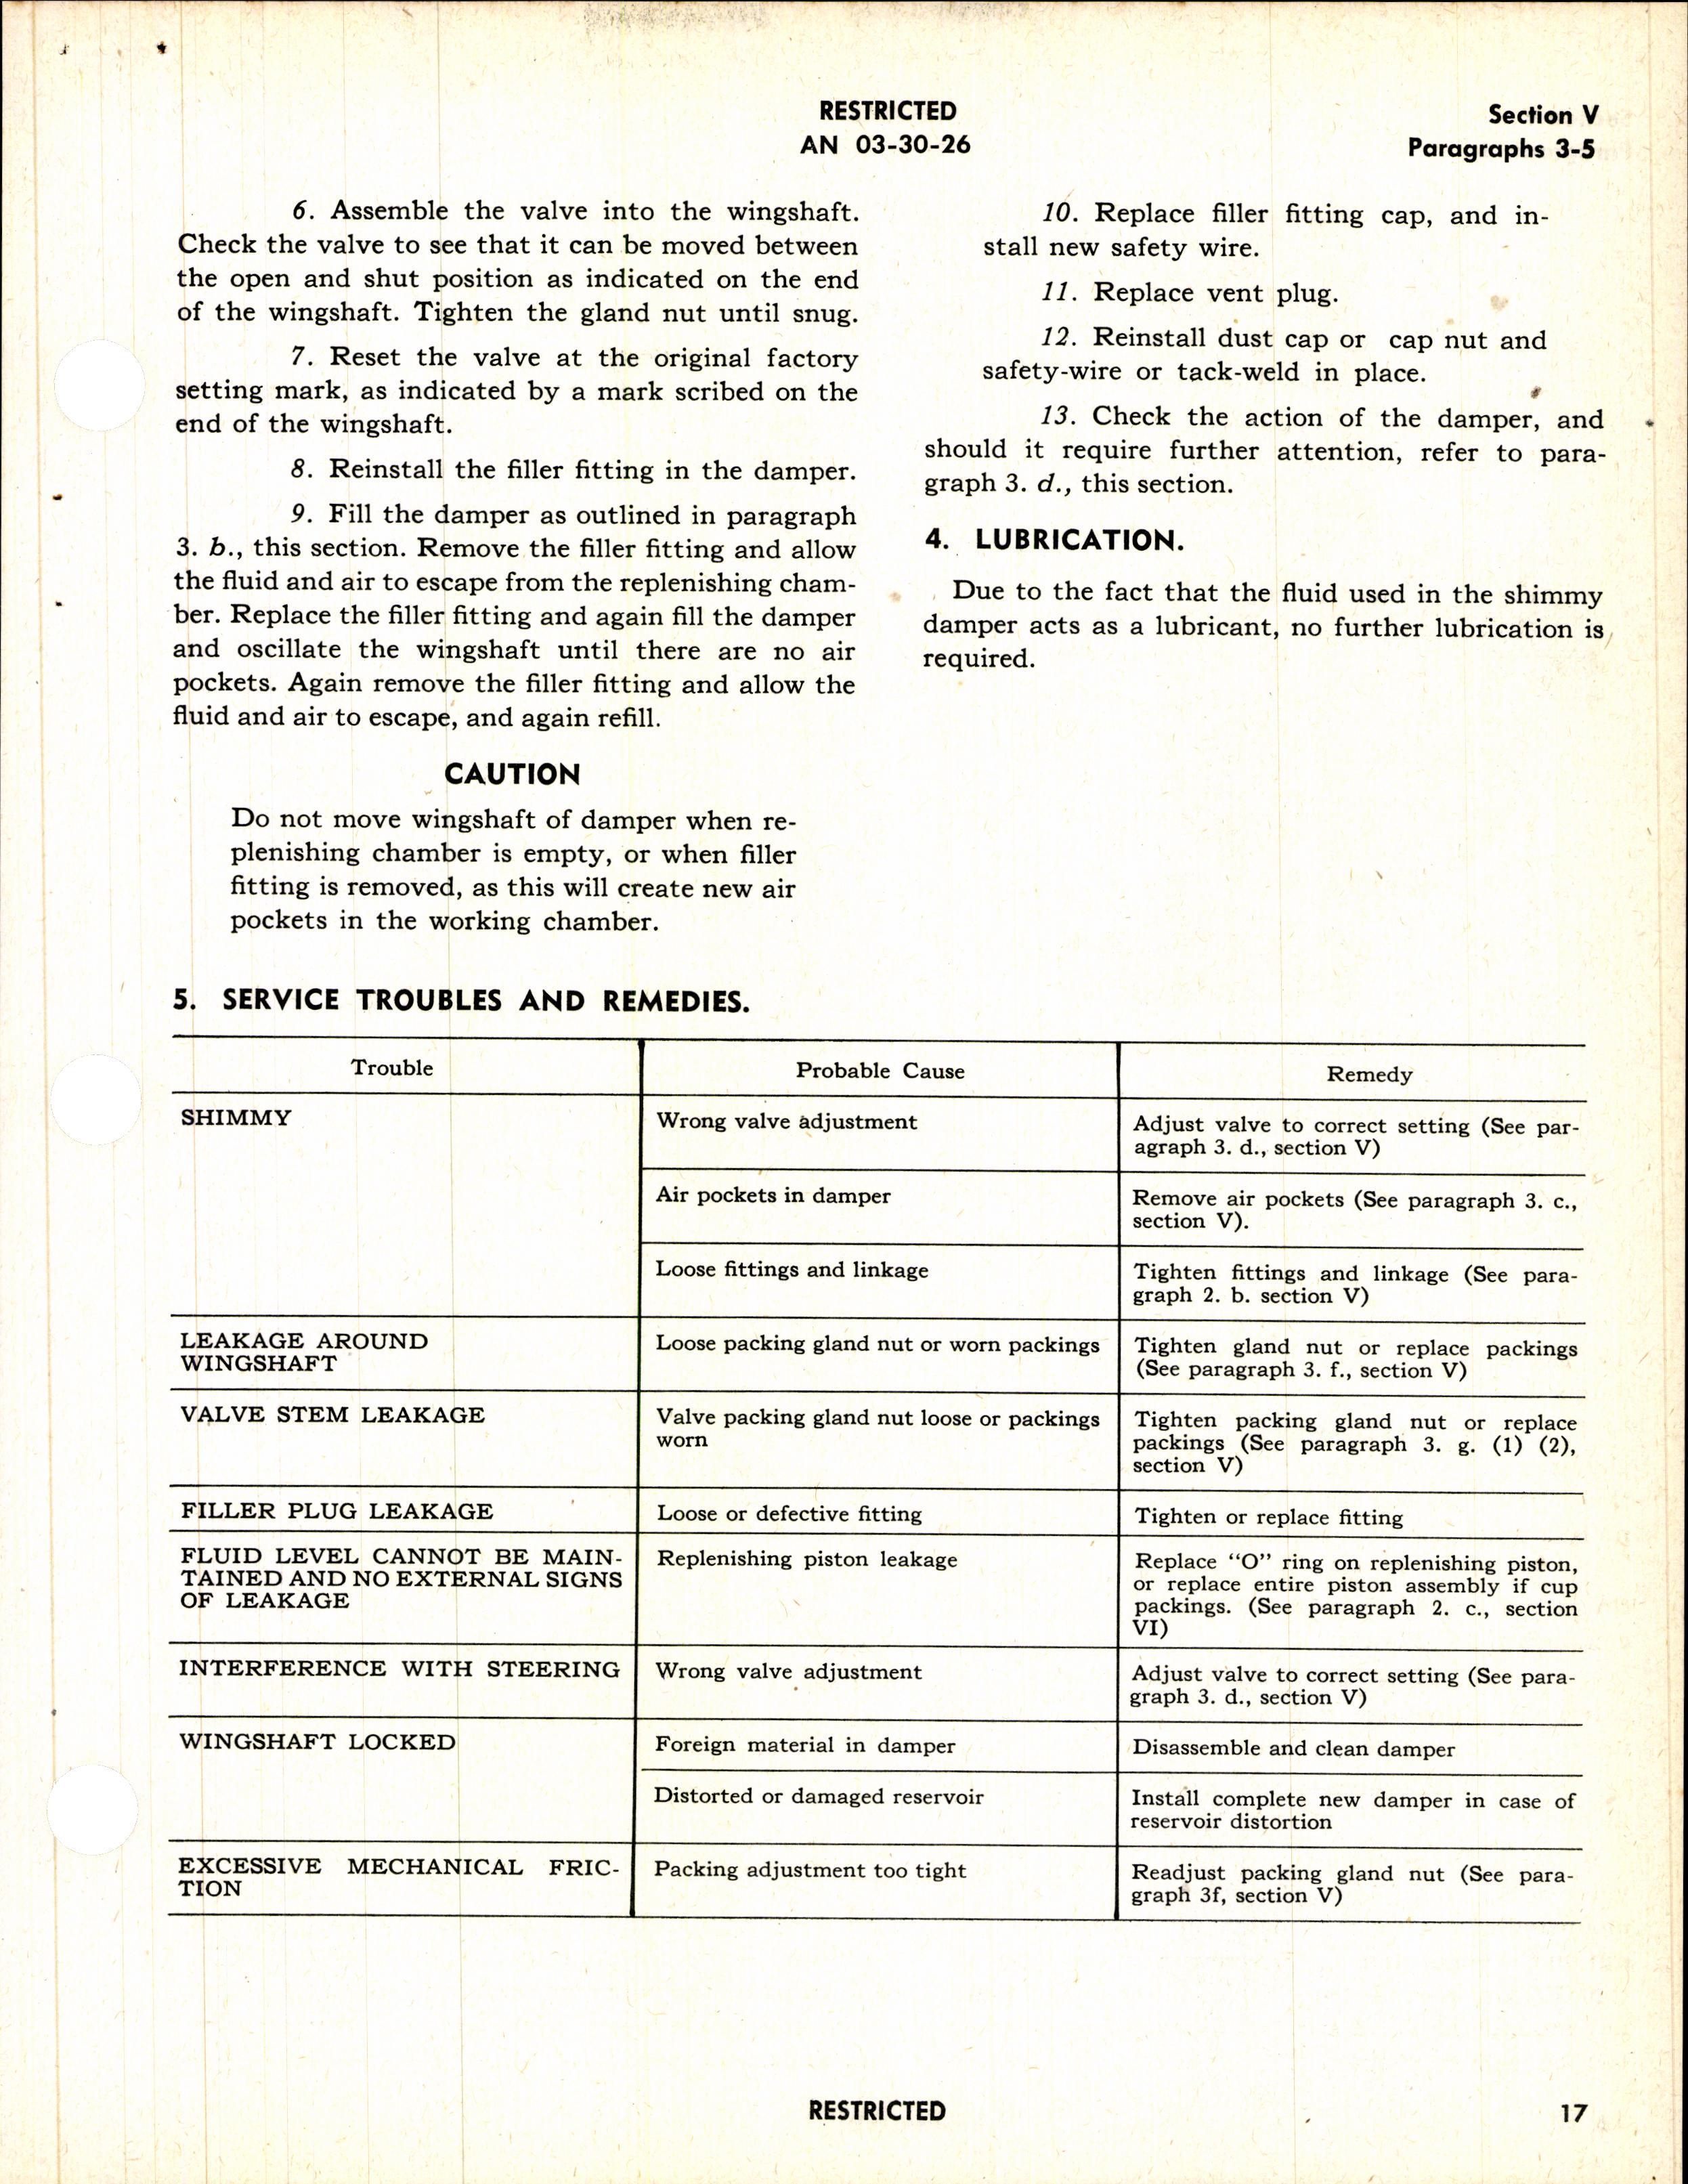 Sample page 45 from AirCorps Library document: Operation, Service, and Overhaul Instructions with Parts Catalog for Shimmy Dampers